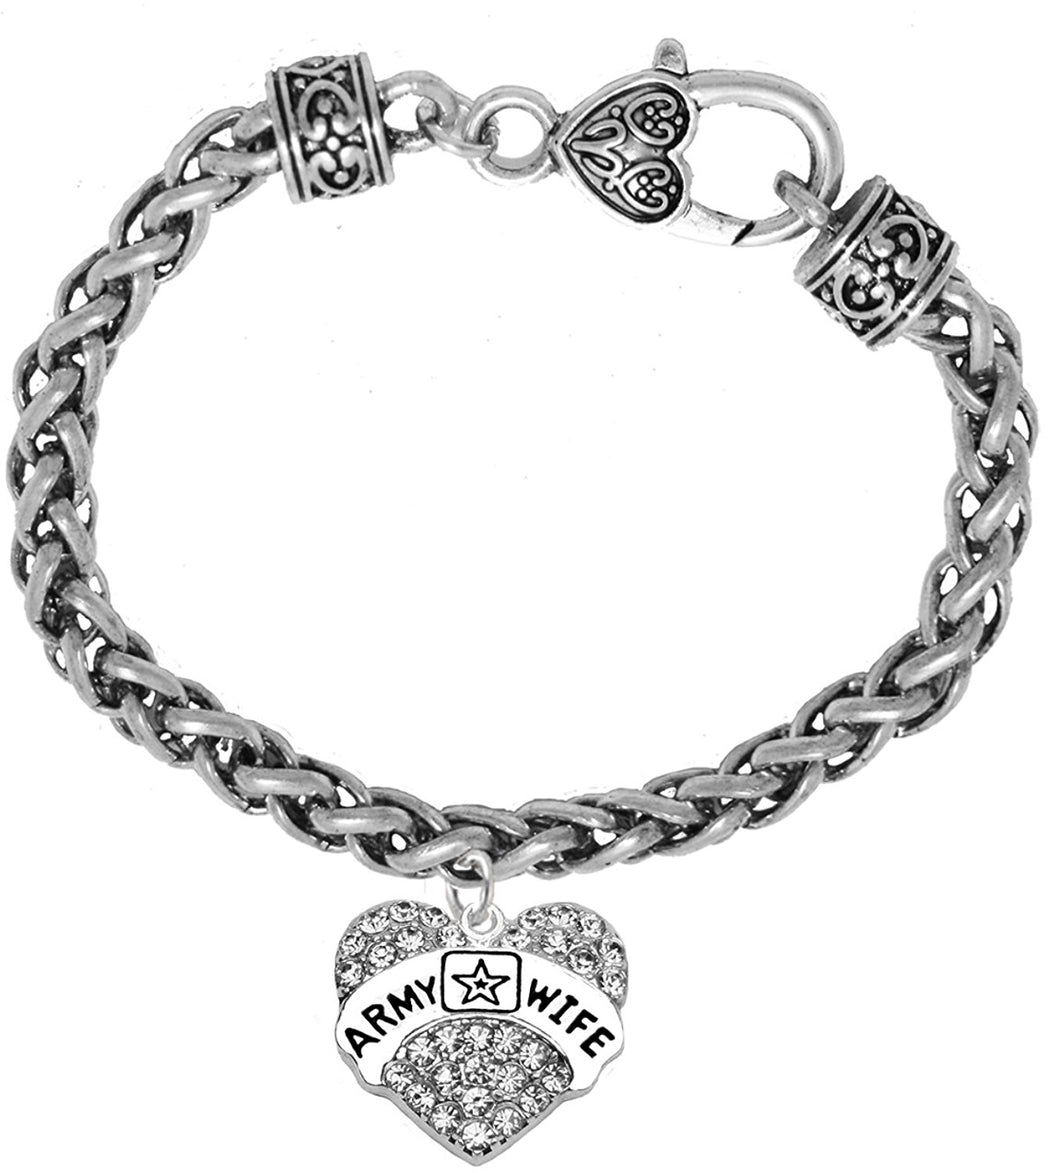 The Perfect Gift Army Wife Hypoallergenic Bracelet, Safe - Nickel & Lead Free